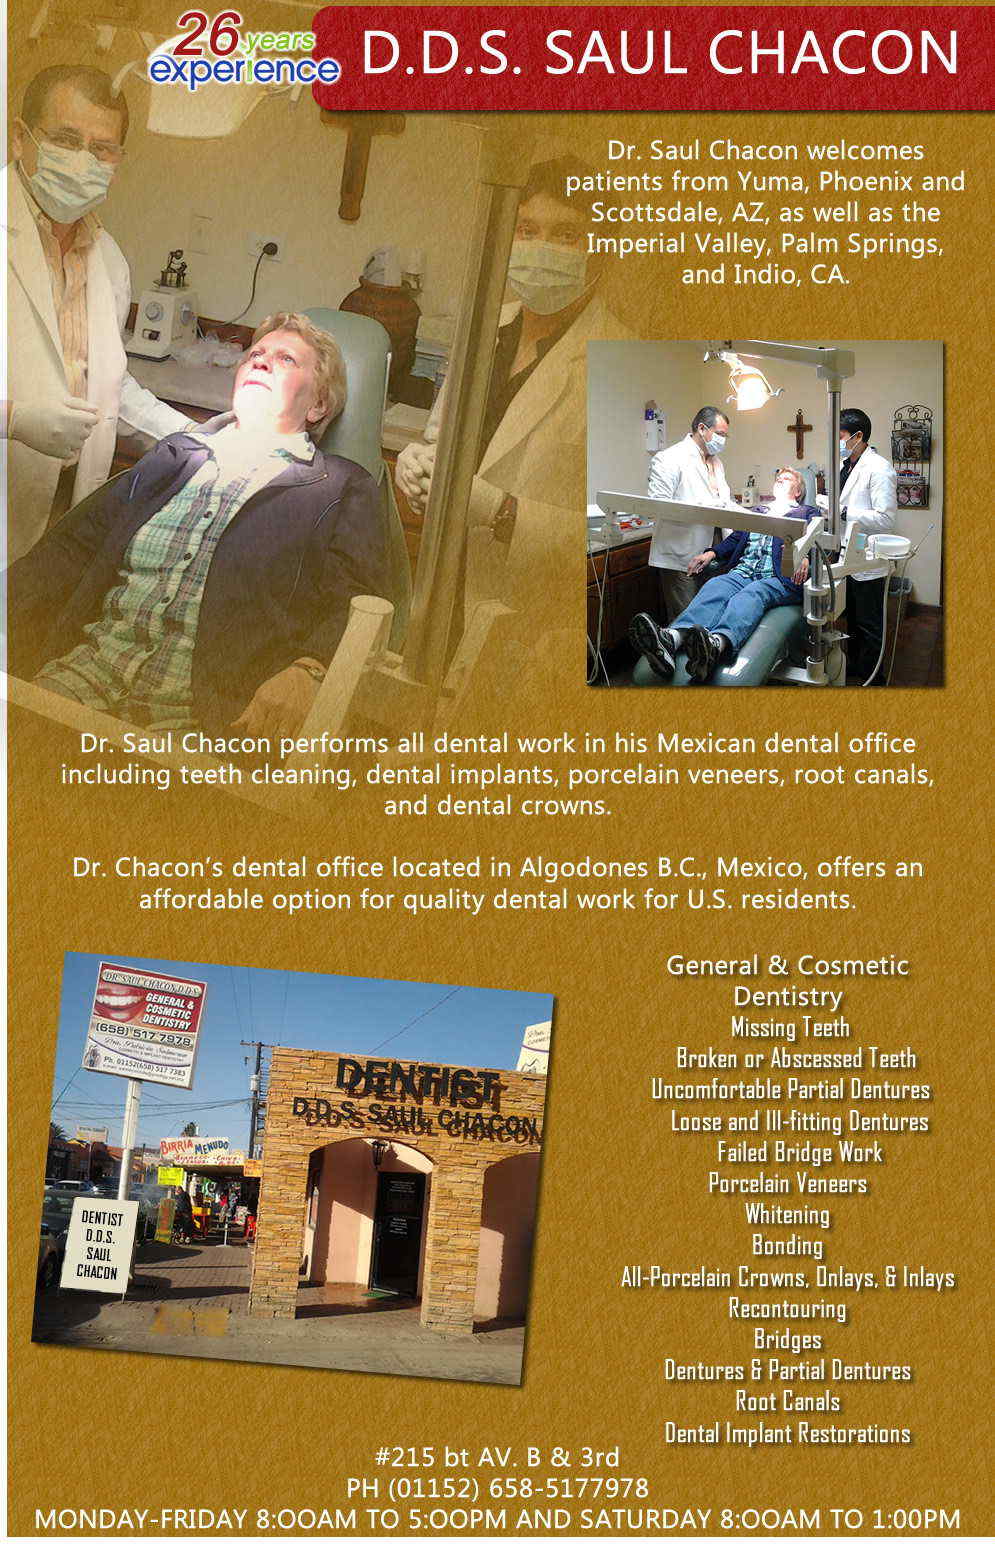 DR. SAUL CHACON in Algodones  in Algodones  ORAL SURGEON DENTIST                 Bridges

X-Rays

Porcelain Veneers

Metal Crowns

Dental Bonding

Deep Cleaning

Denture Repair	Traditional Acrylic Dentures

Prescriptions

Root Canals

Metal Bridges

White Fillings

Root Canal Therapy

Relines (Hard or Soft)	General Oral Surgeries

Porcelain Crowns

Flexible Partials

Composite Posts

Teeth Whitening

Extractions

Flexible Parials	Implants

Porcelain Veneers

Wisdom Tooth Extractions

Metal Posts

Traditional Cleaning

Metal/Acrylic Partials


 Immediate Upper and Lower Dentures (Alveoplasty) maps        